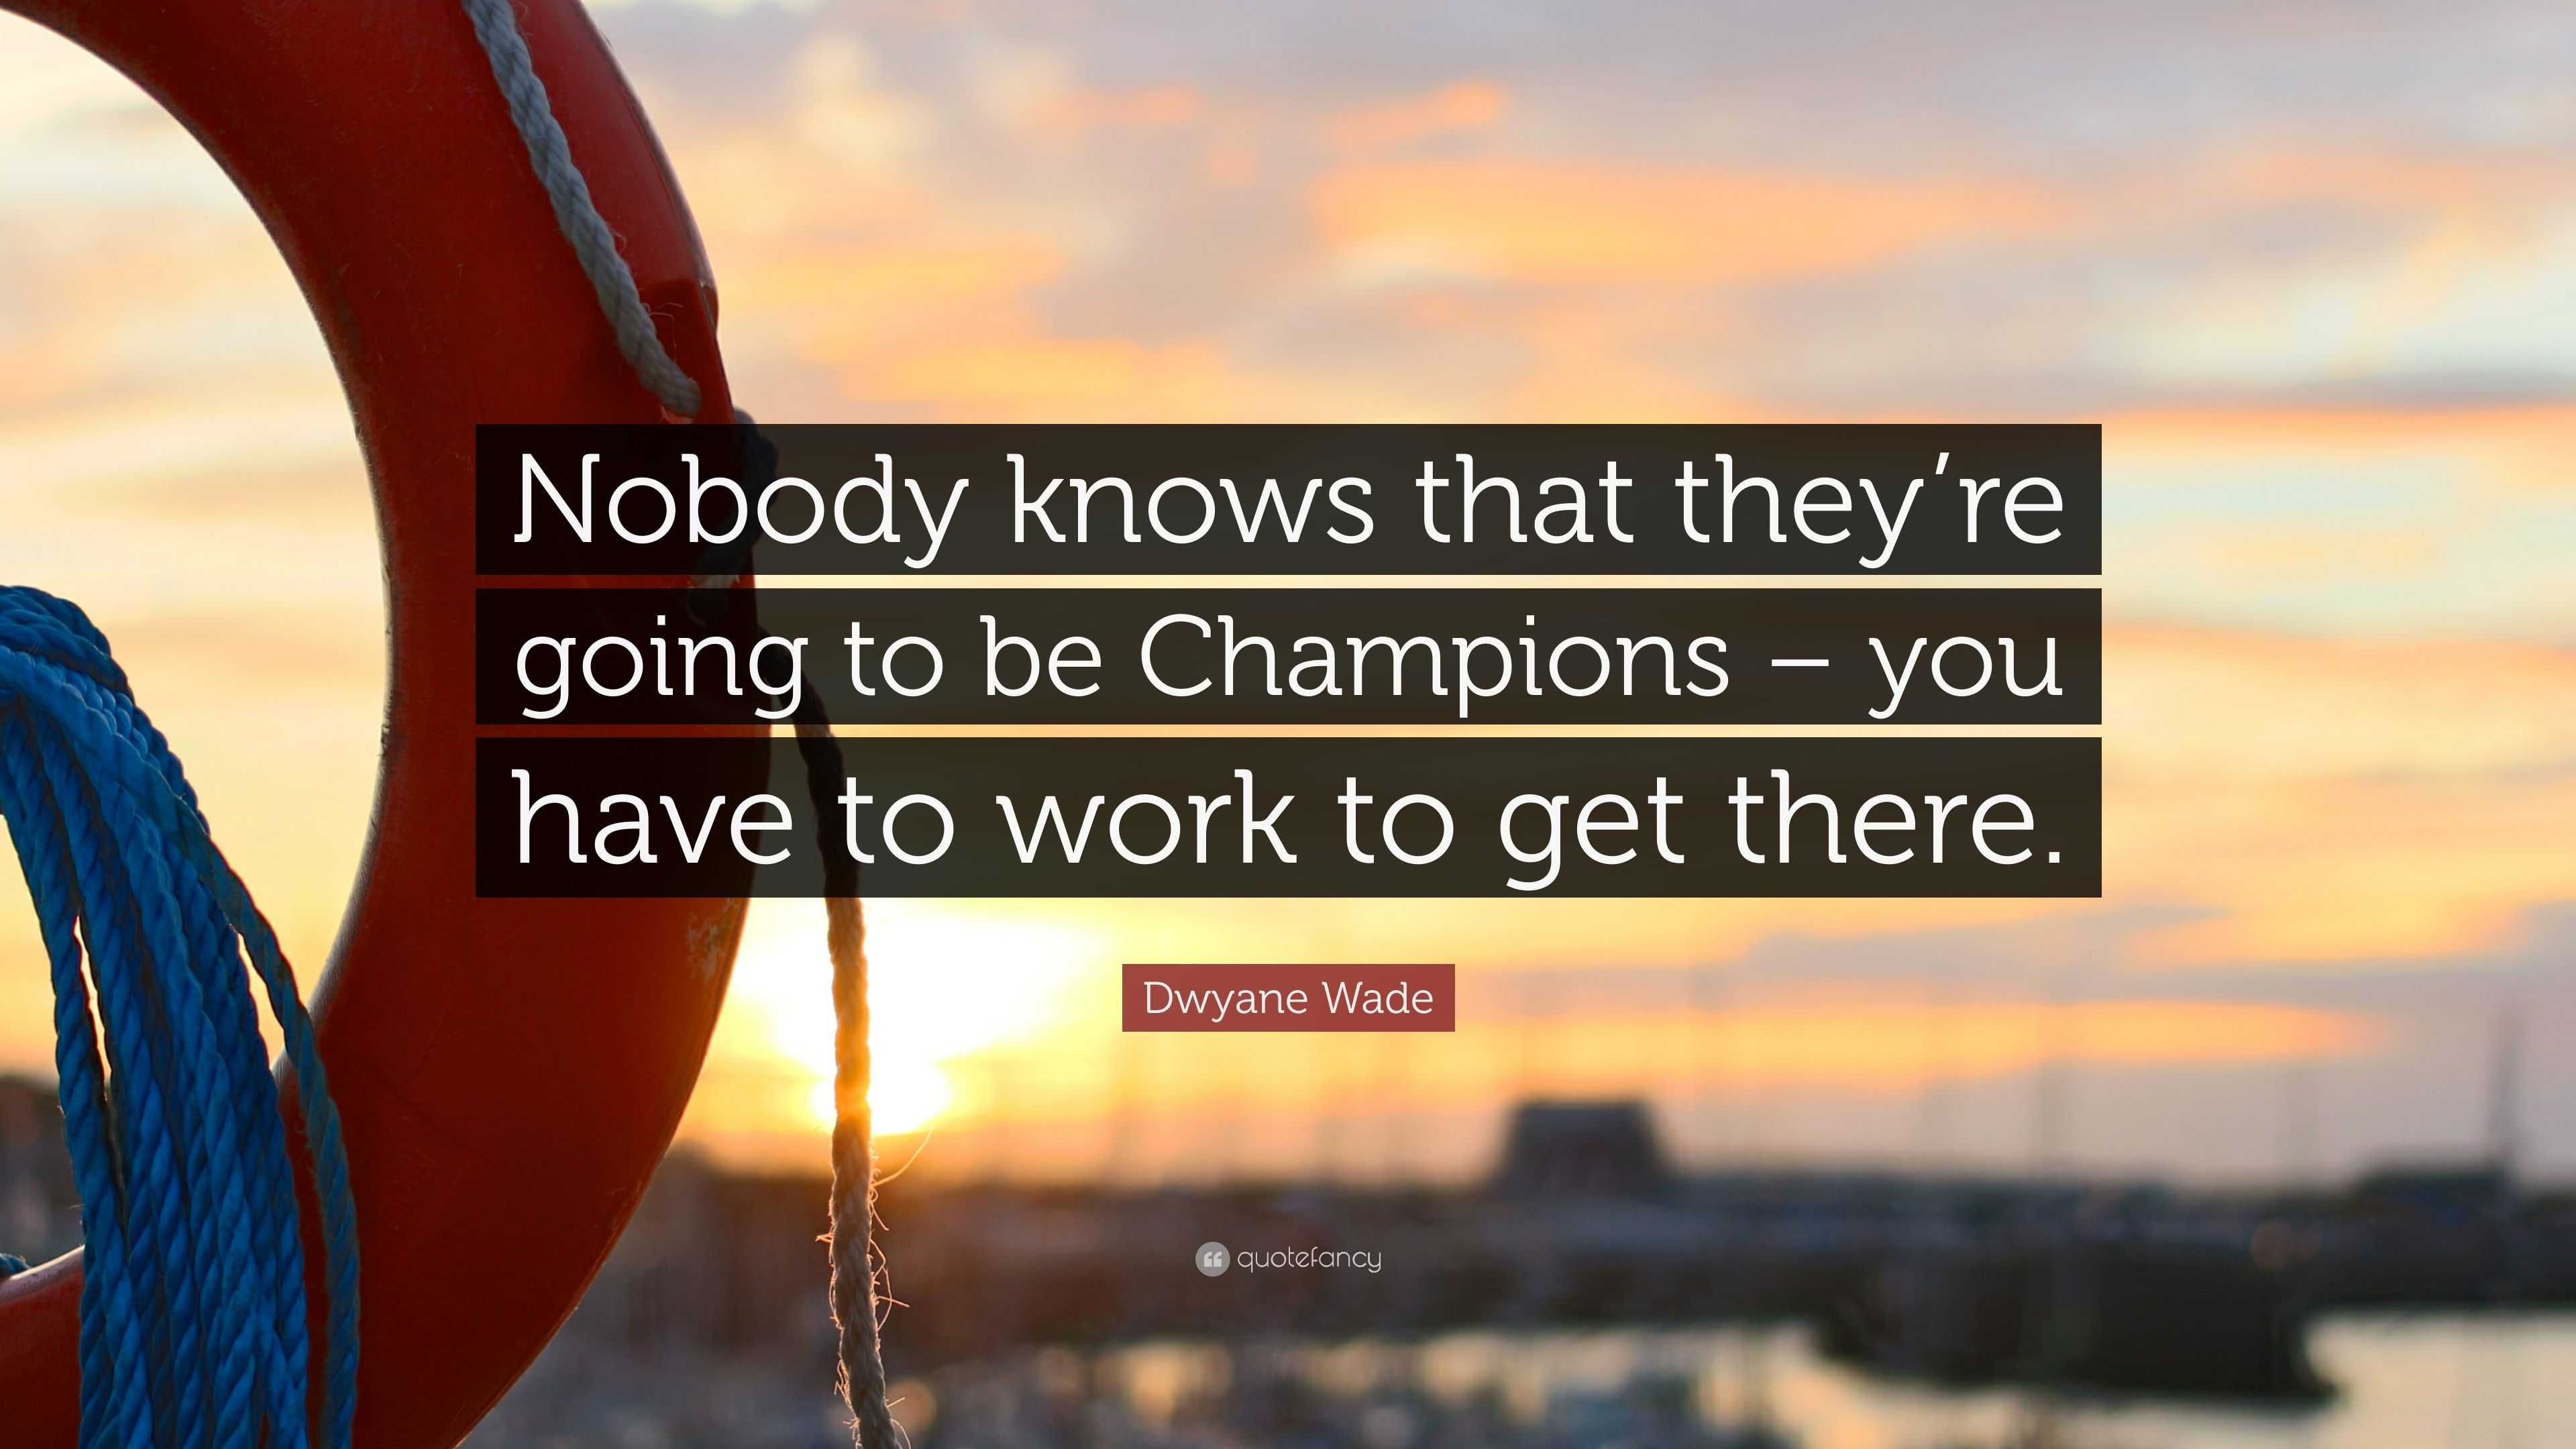 The Work will turn you into a Champion